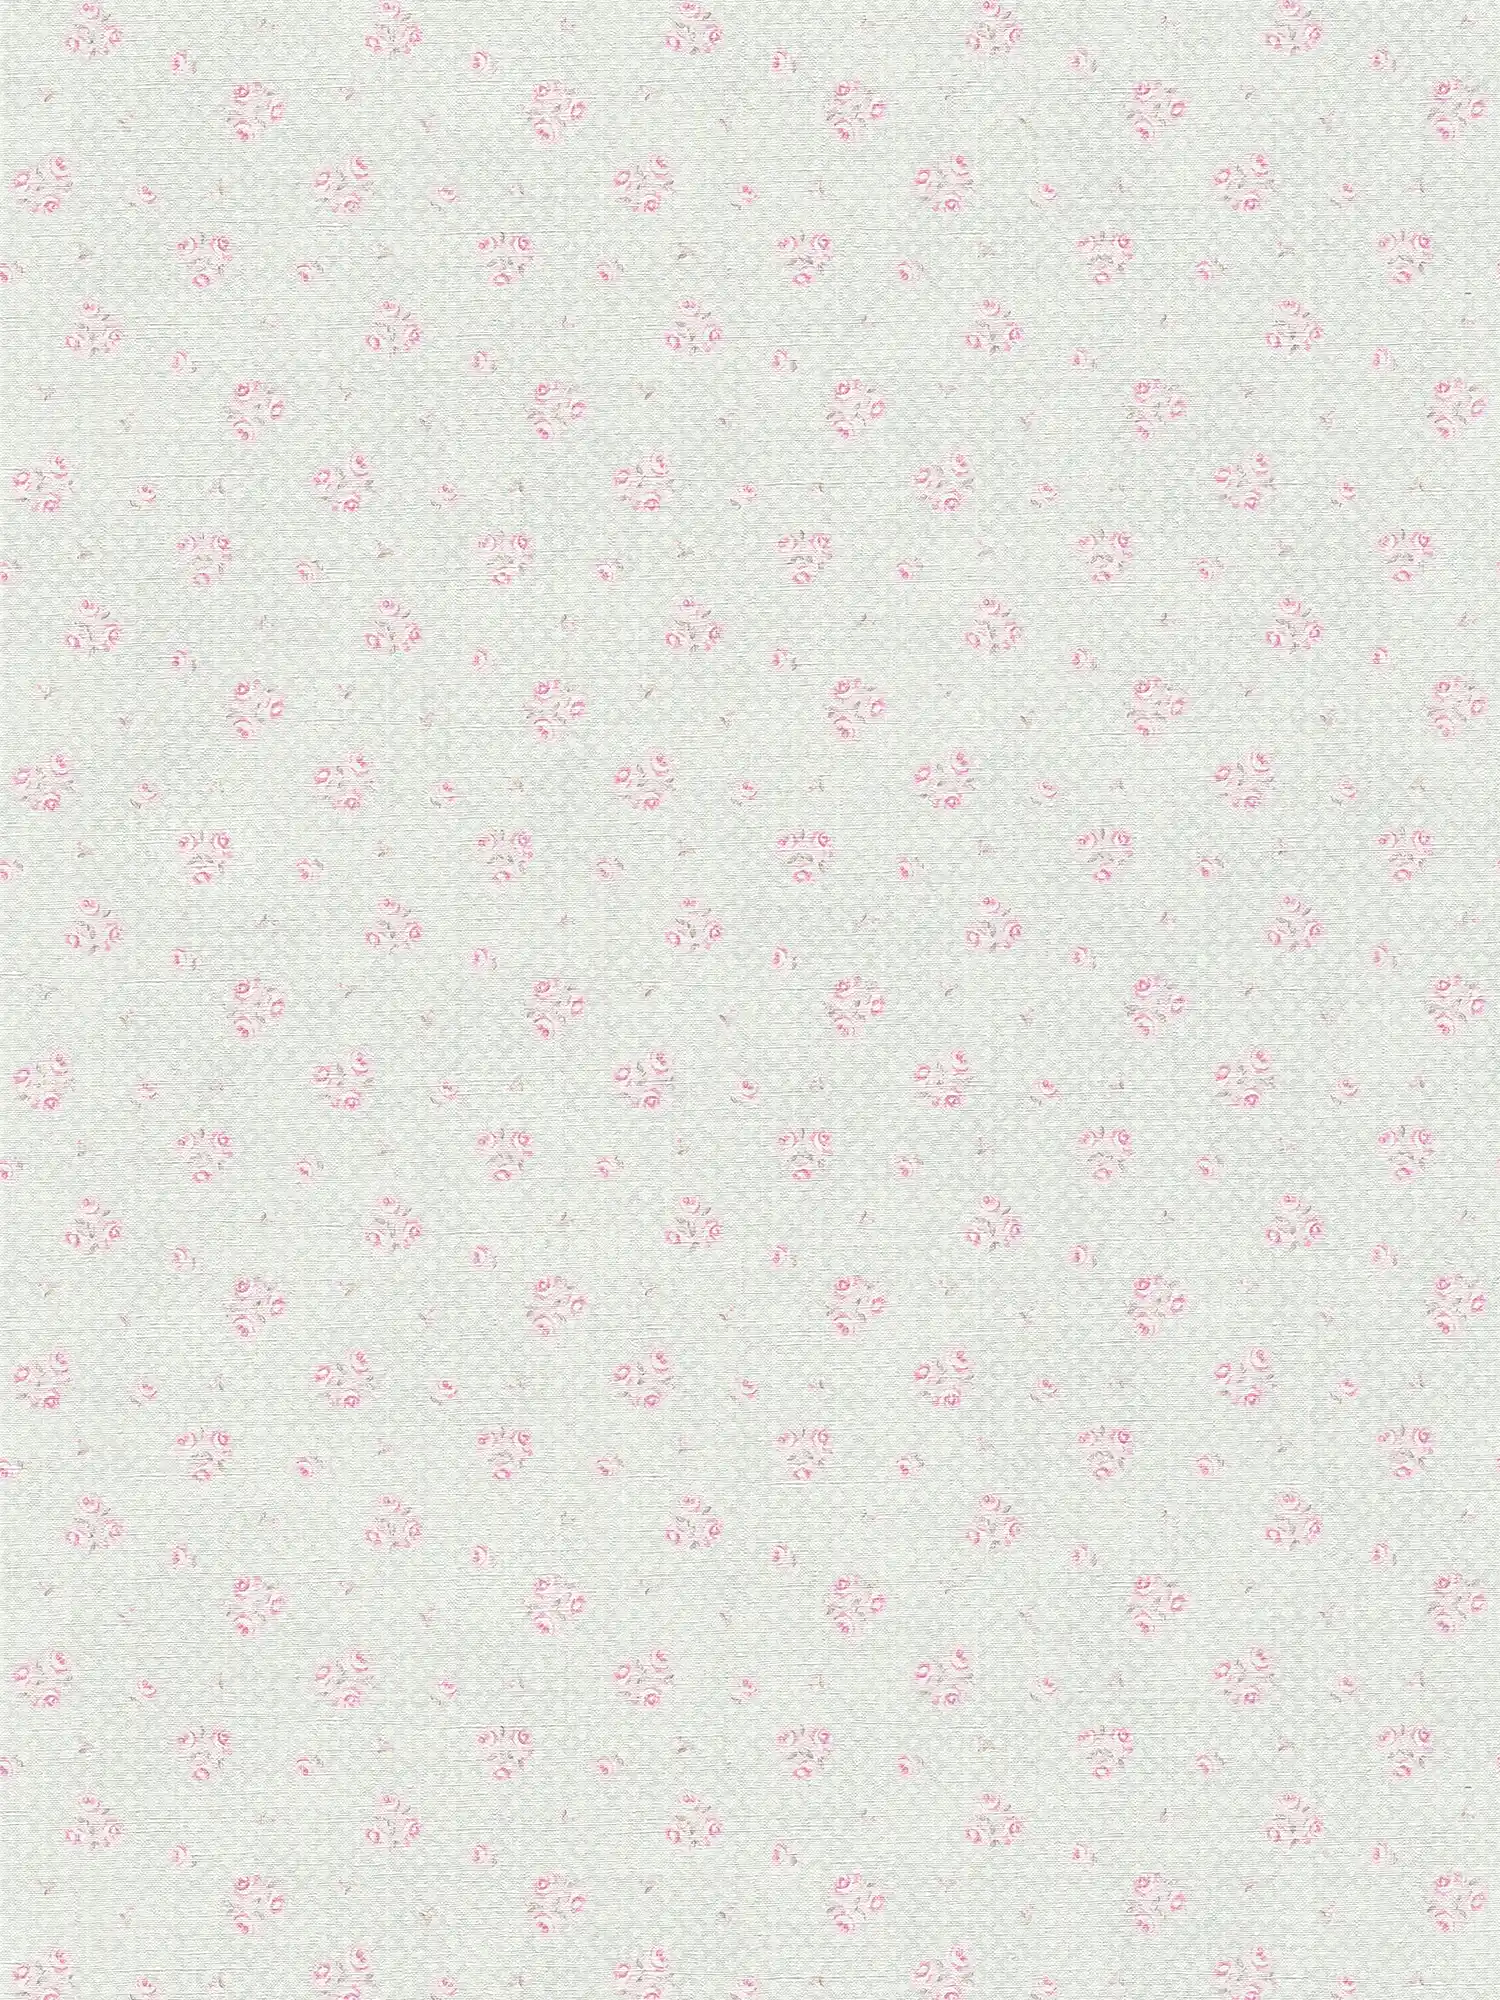 Non-woven wallpaper with floral pattern in Shabby Chic style - grey, pink, white
